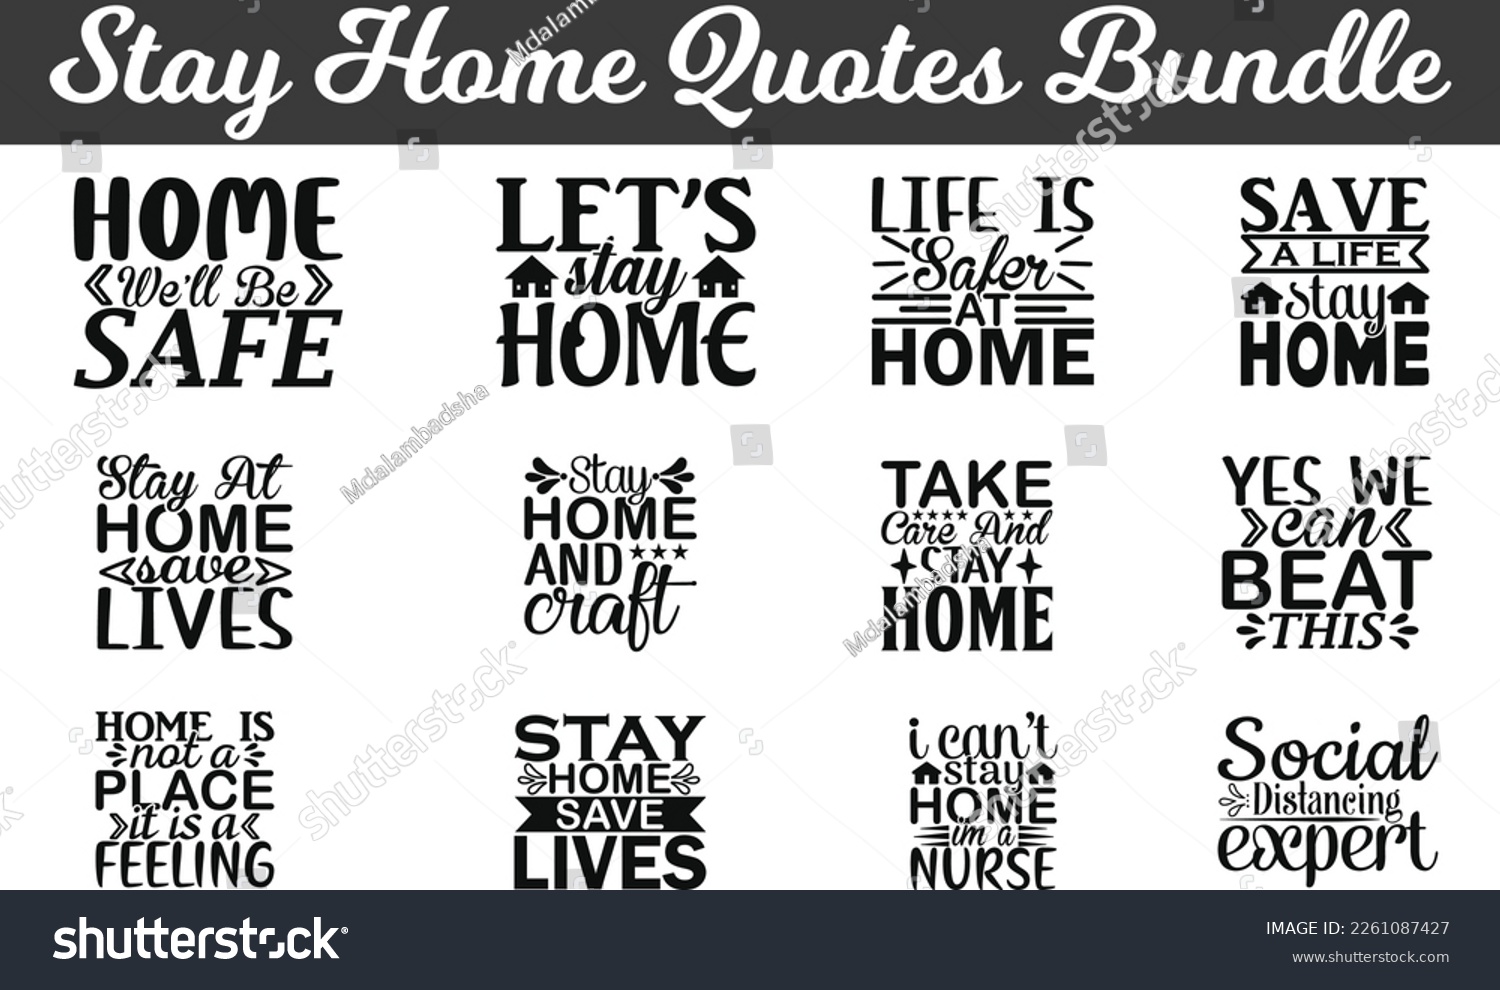 SVG of Stay Home Quotes Bundle, Stay home quotes t shirt designs bundle, about Quotes SVG files for, stay the blazes home SVG. svg